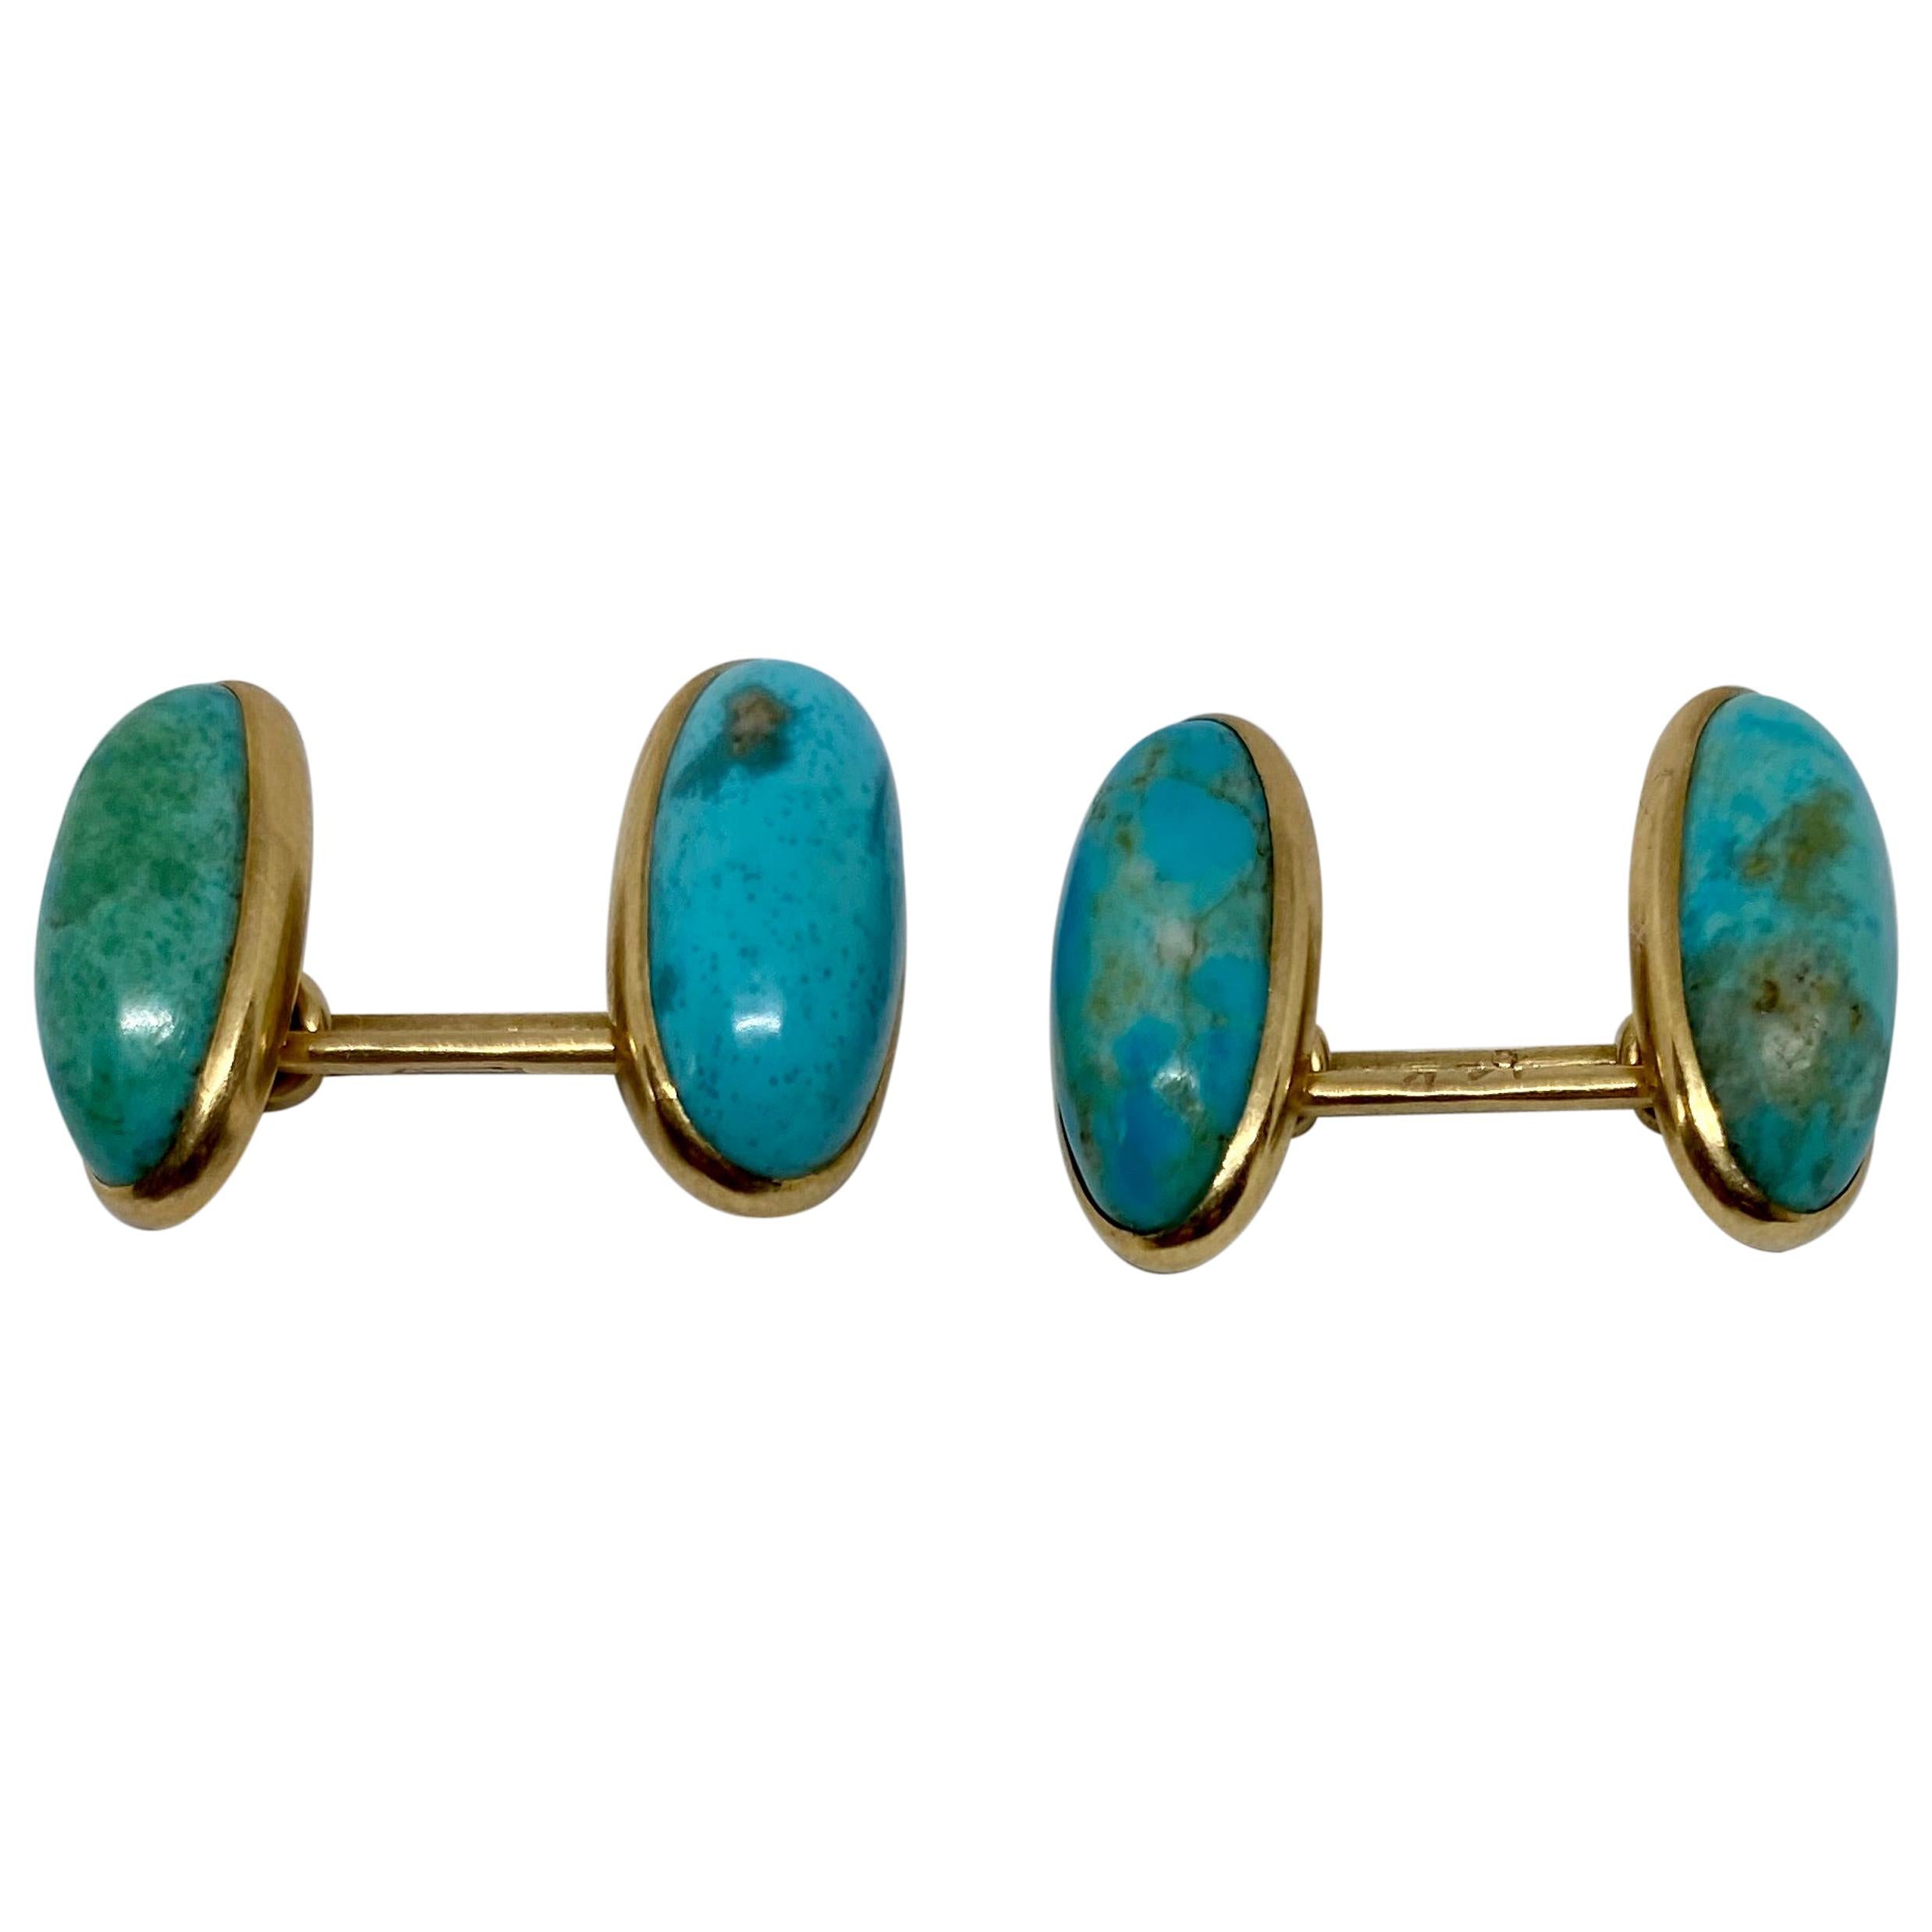 Art Deco Cufflinks with Turquoise Set in 14 Karat Rose Gold by Larter & Sons